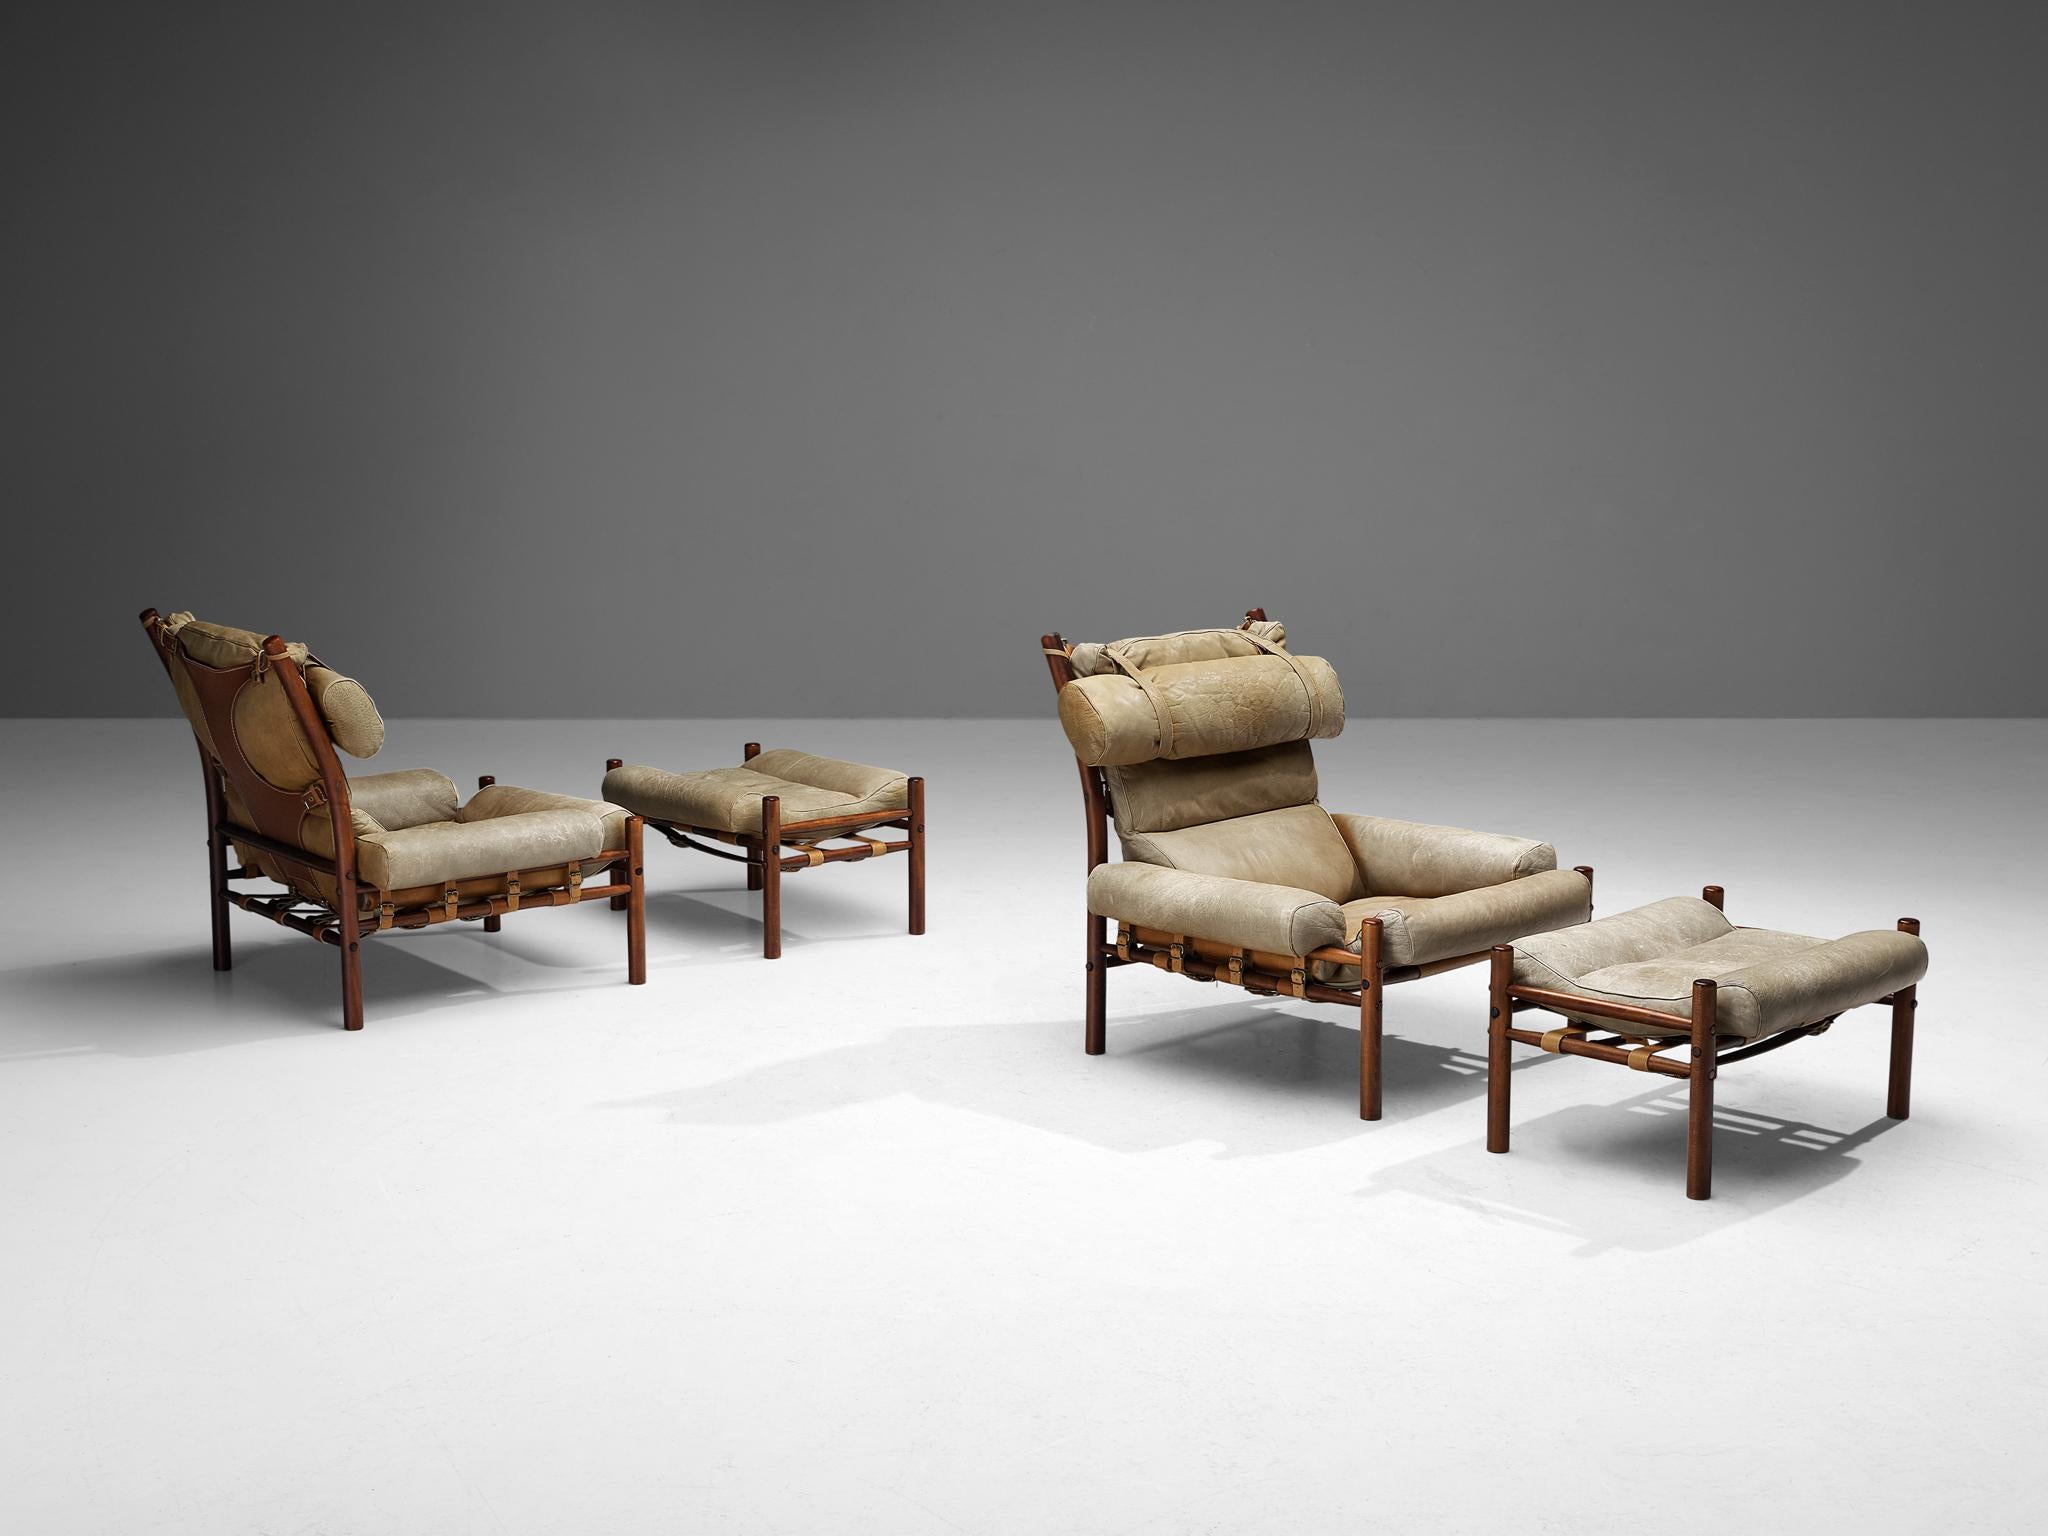 Arne Norell for Norell Möbel AB, pair of 'Inca' lounge chairs with ottomans, leather, stained beech, Sweden, 1960s

A pair of iconic 'Inca' lounge chairs with ottomans executed in a beige to sand colored leather designed by Arne Norell. The frame